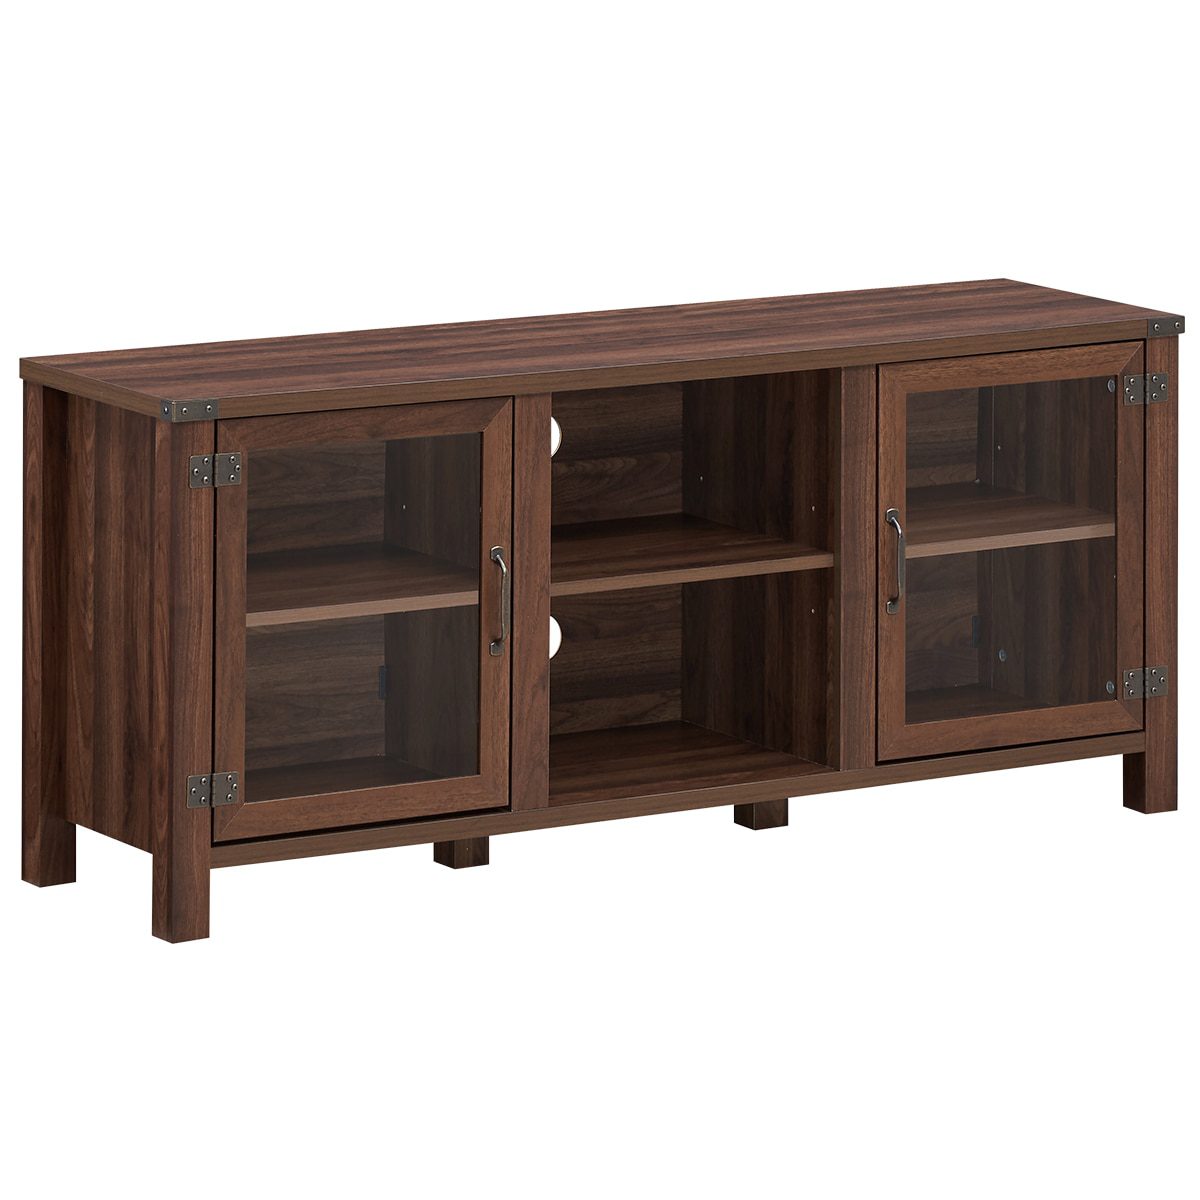 TV Stand Entertainment Center for TV's up to 65" with Storage Cabinets HW65217